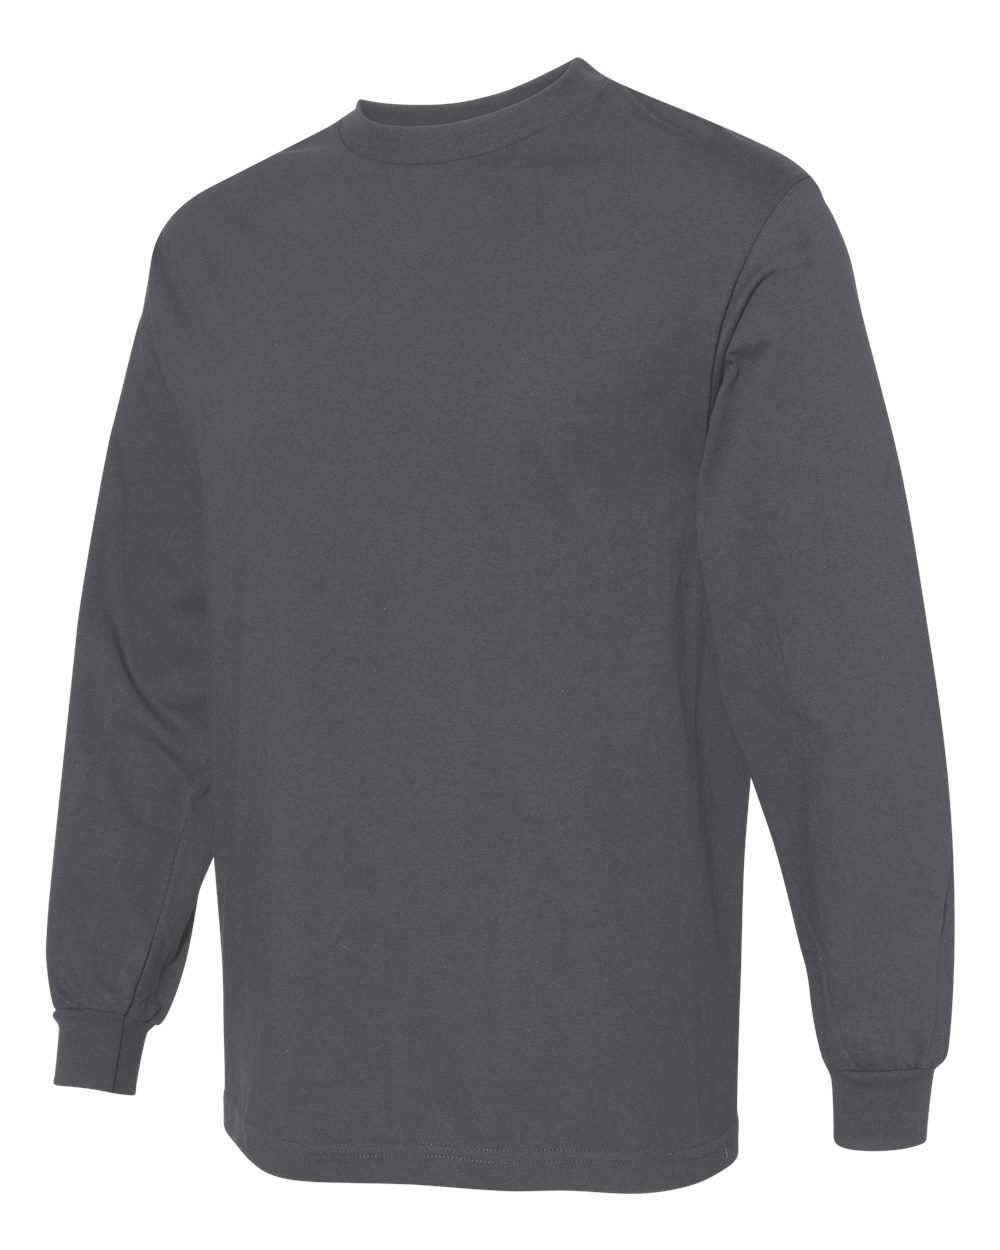 American Apparel 1304 Unisex Heavyweight Cotton Long Sleeve T-Shirt - Charcoal - HIT a Double